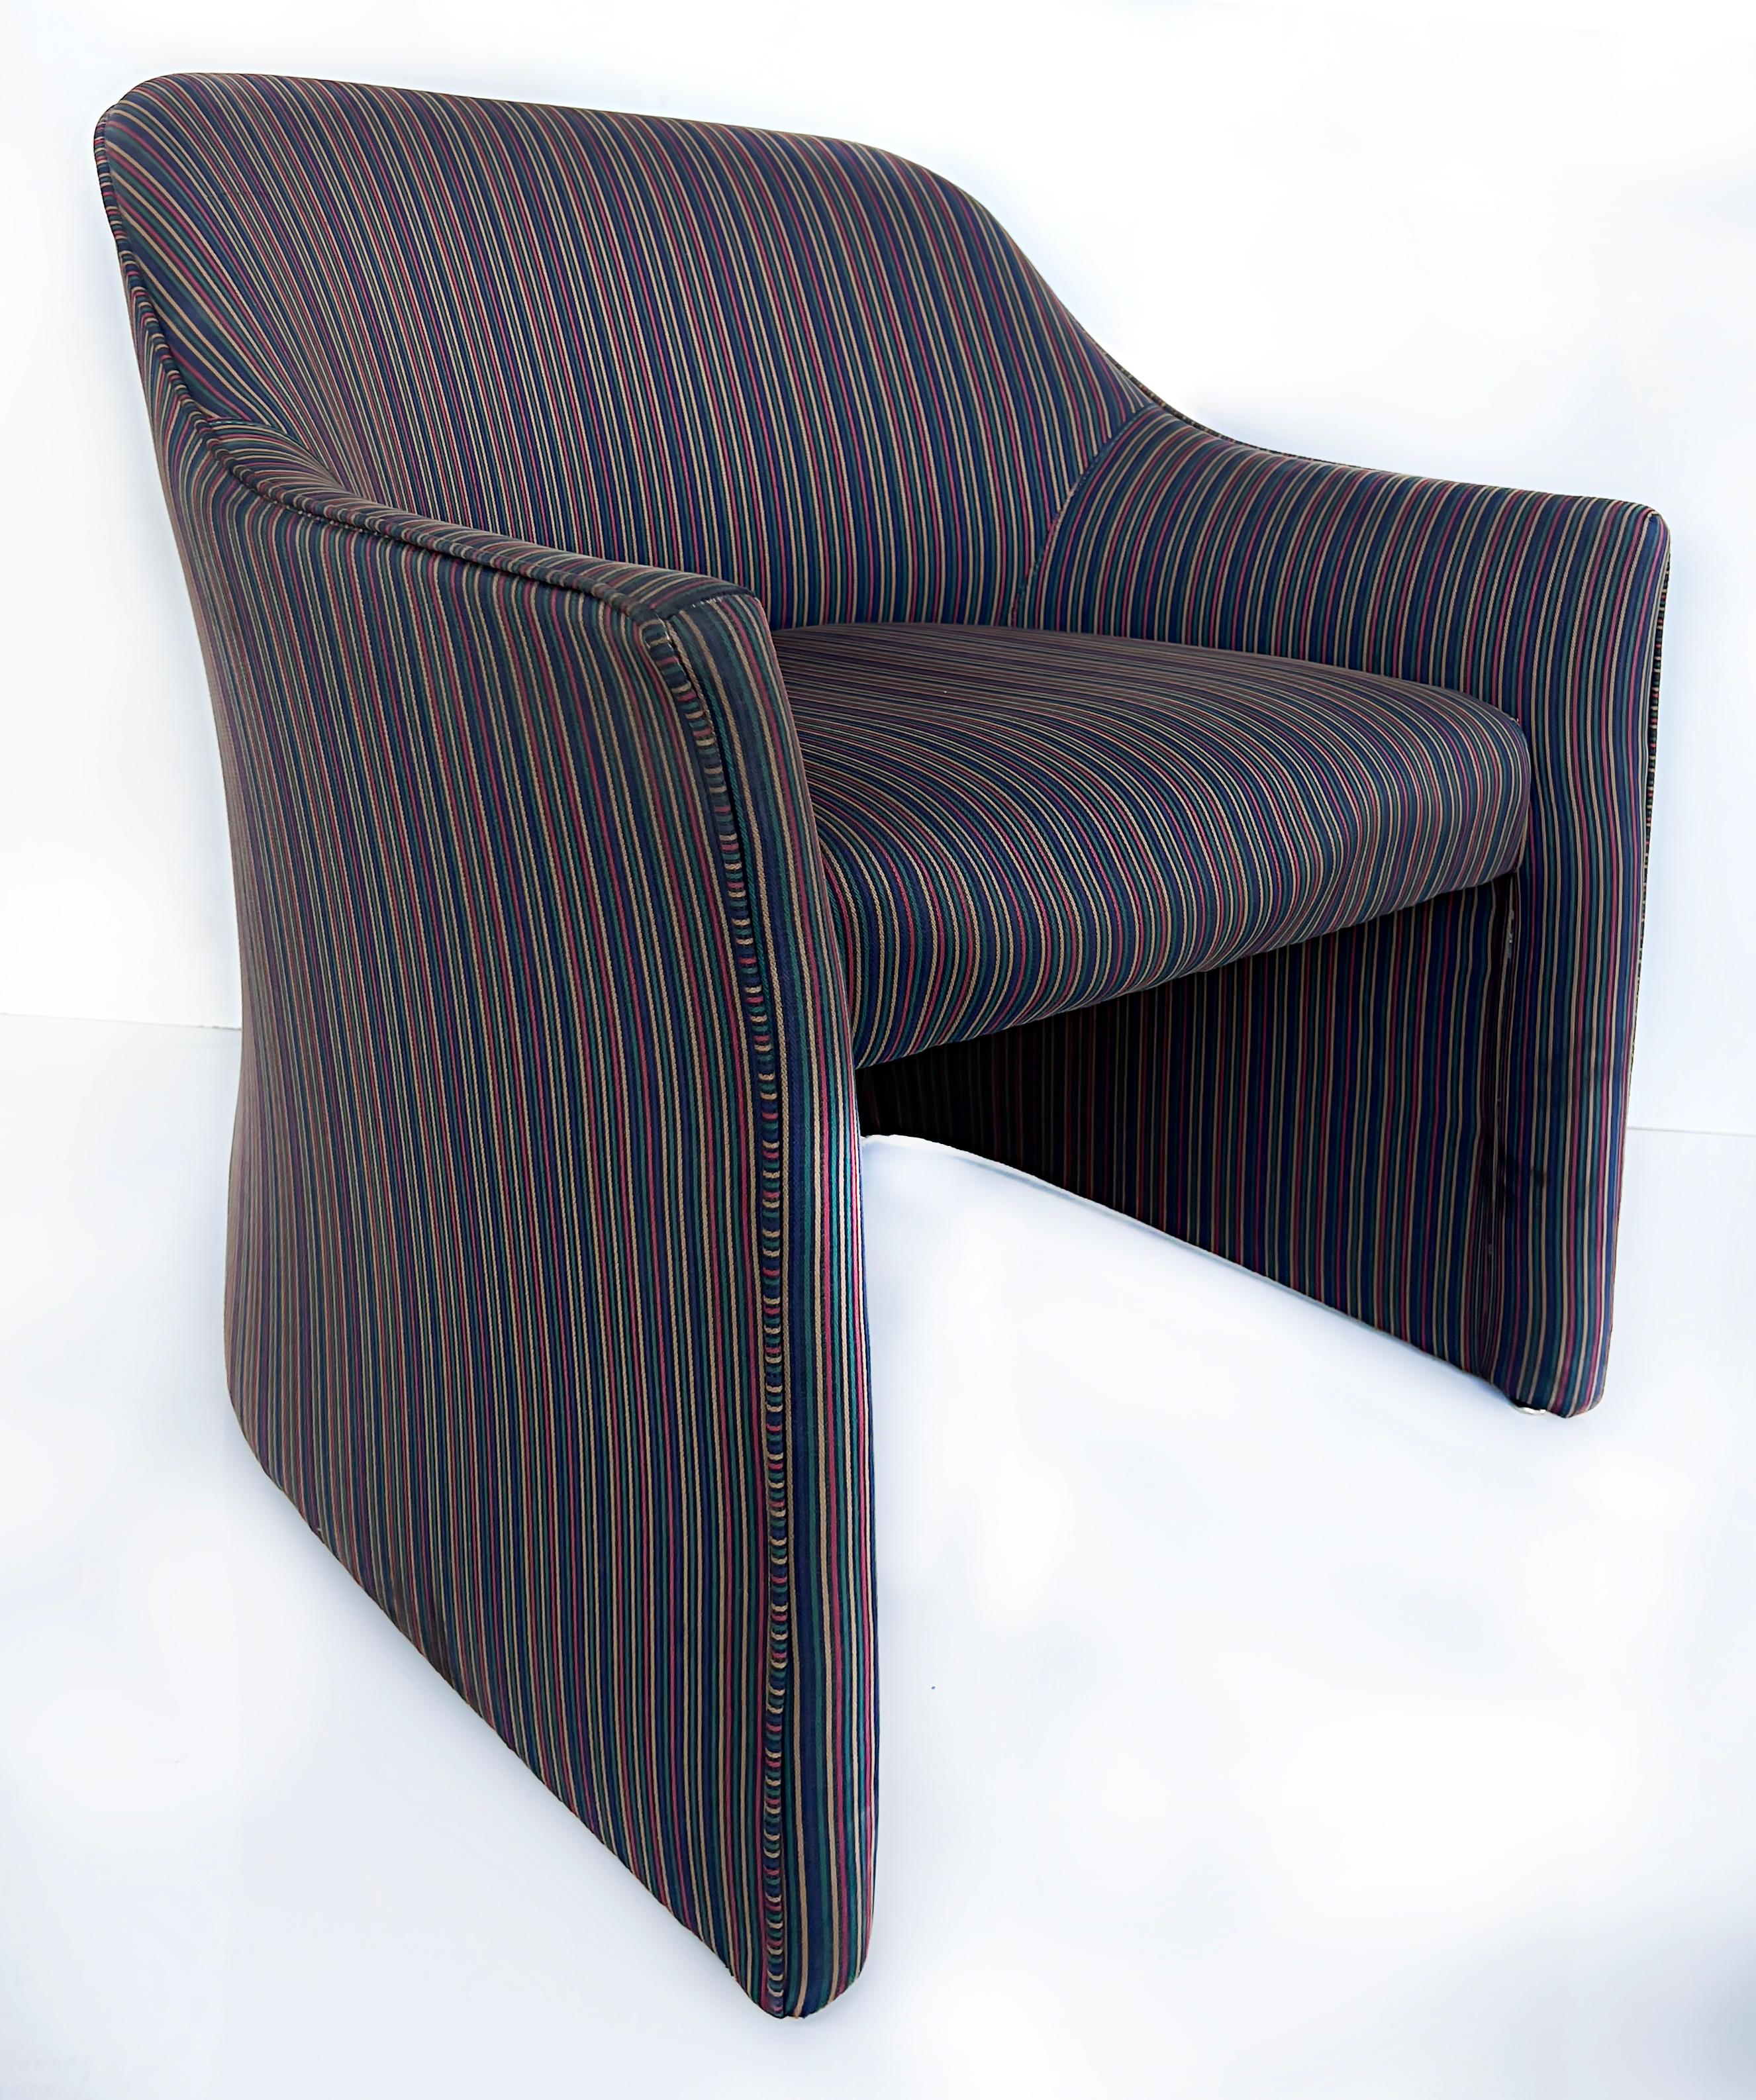 Fabric 1980s Upholstered Postmodern Chairs by Ward Bennett, Pair For Sale